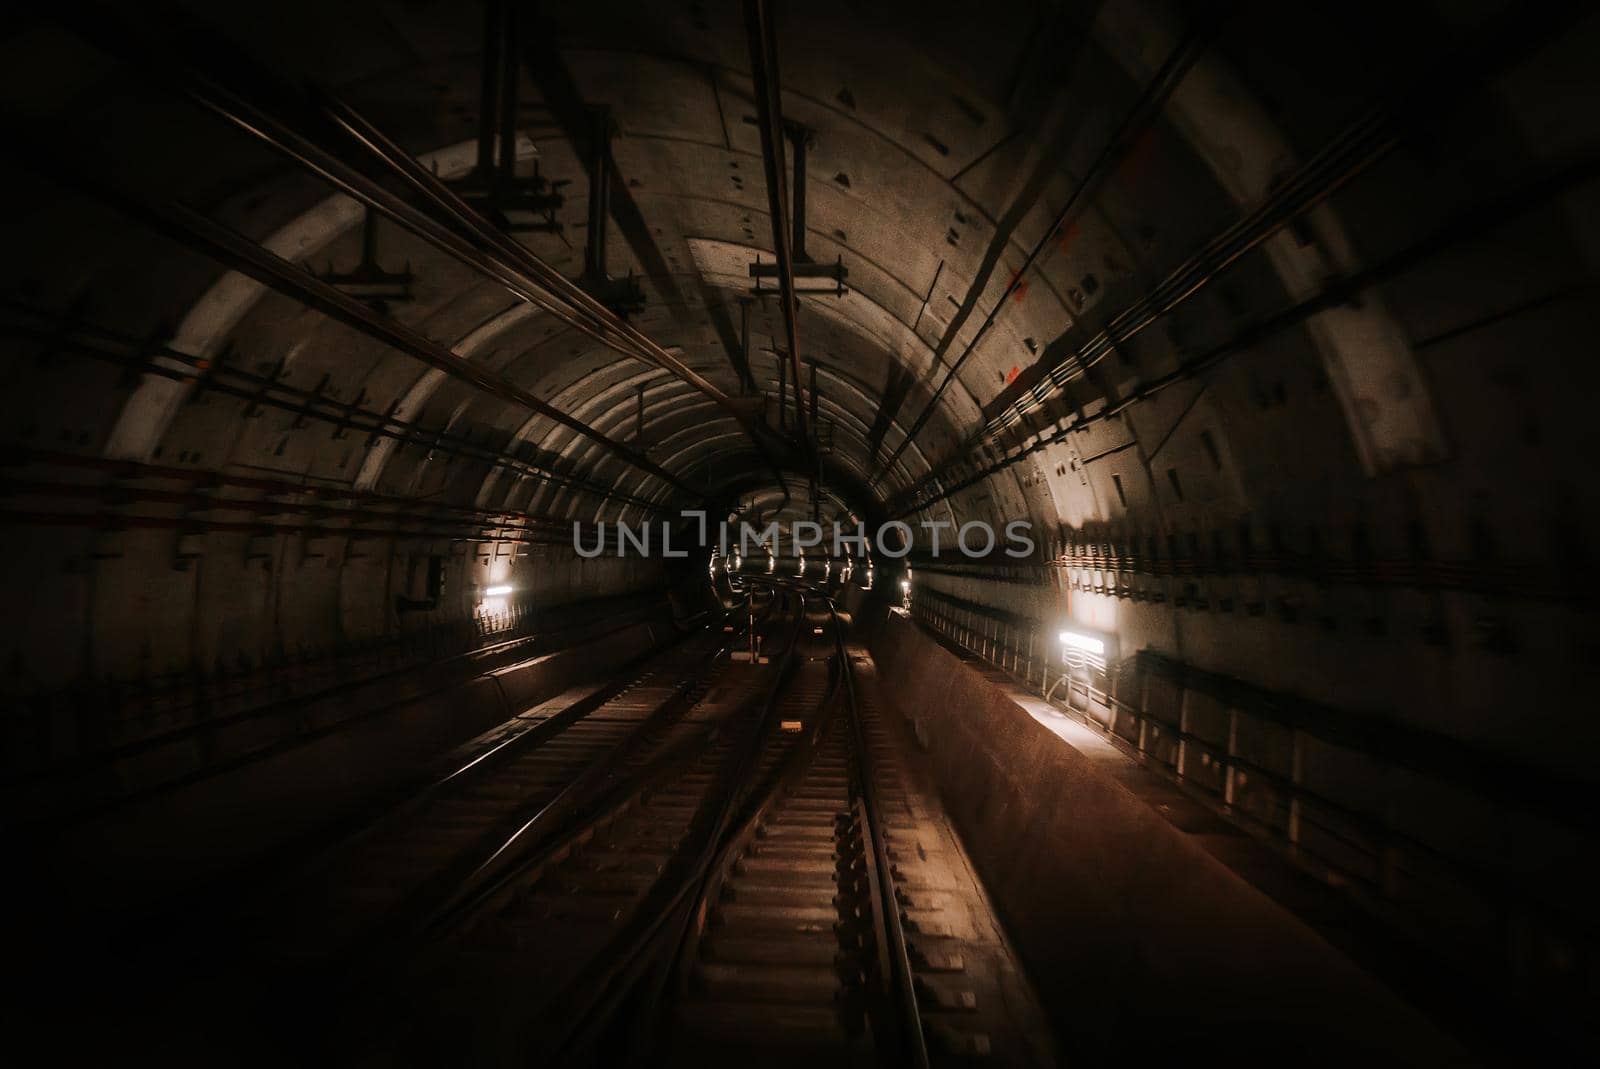 Moving driverless metro train in Oslo, Norway. Riding forward through underground tunnel. Advanced subway transportation system. High quality photo